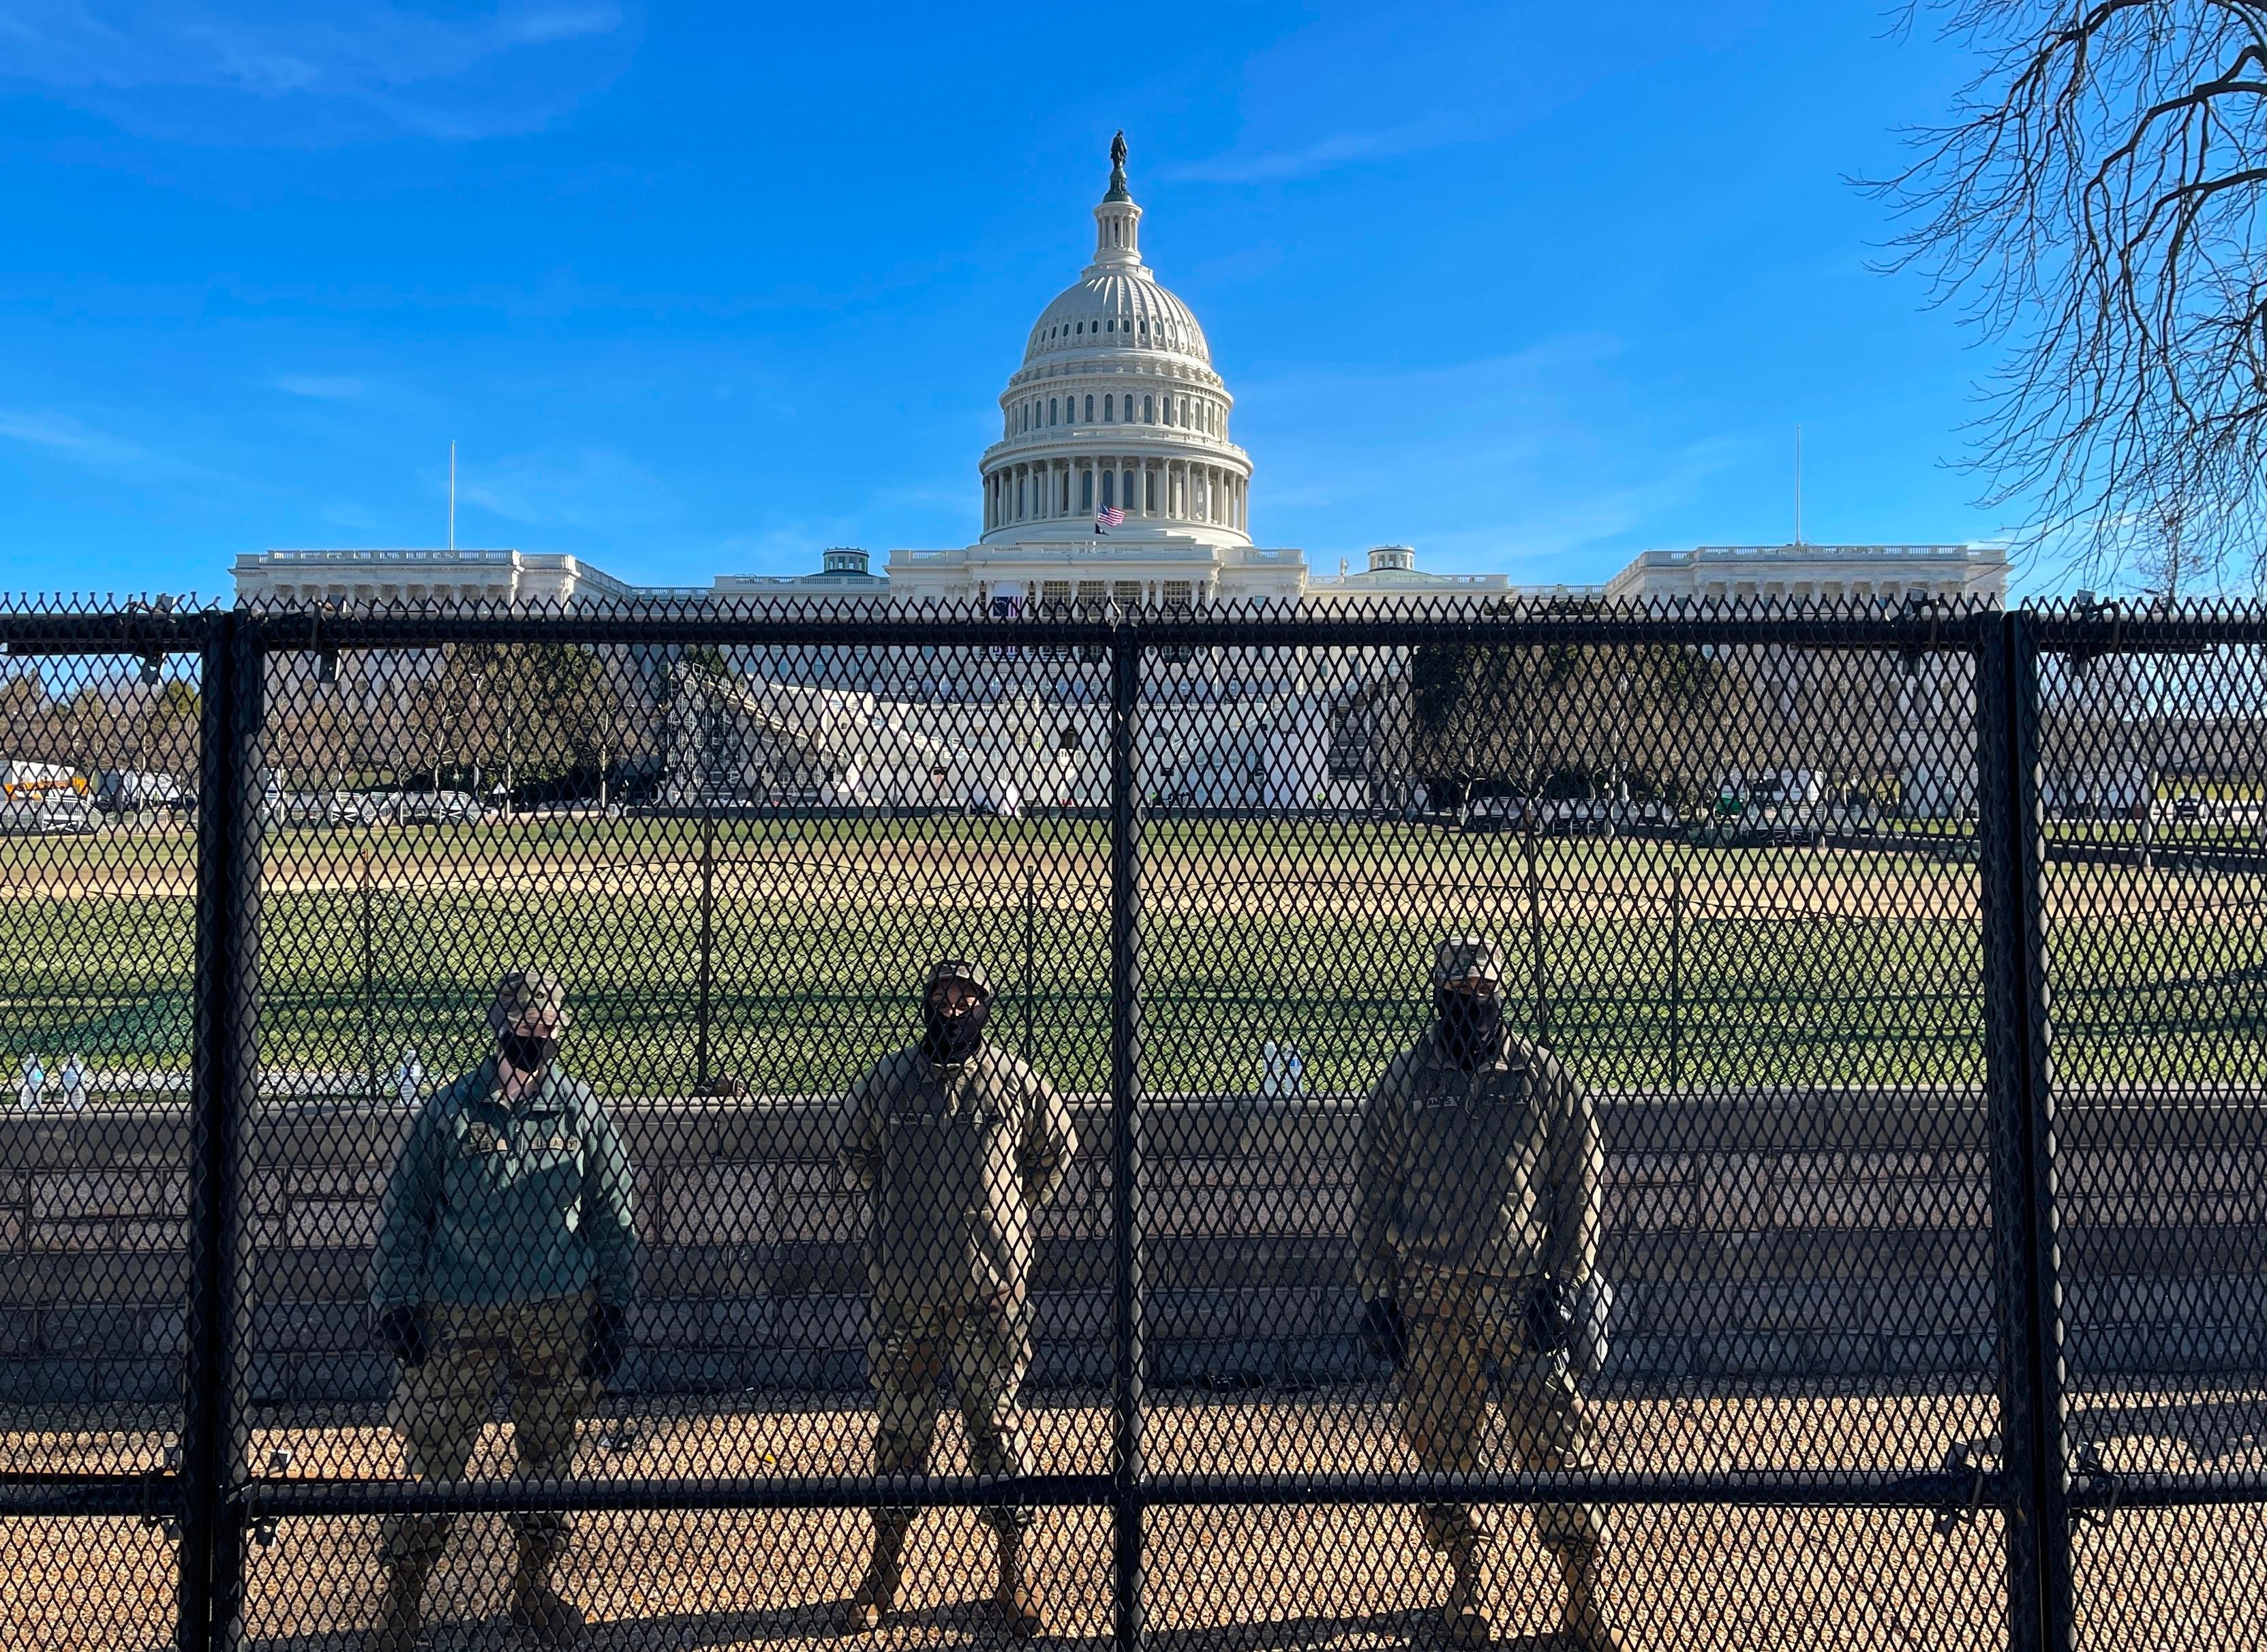 Security concerns will see the National Mall closed for the inauguration of Joe Biden